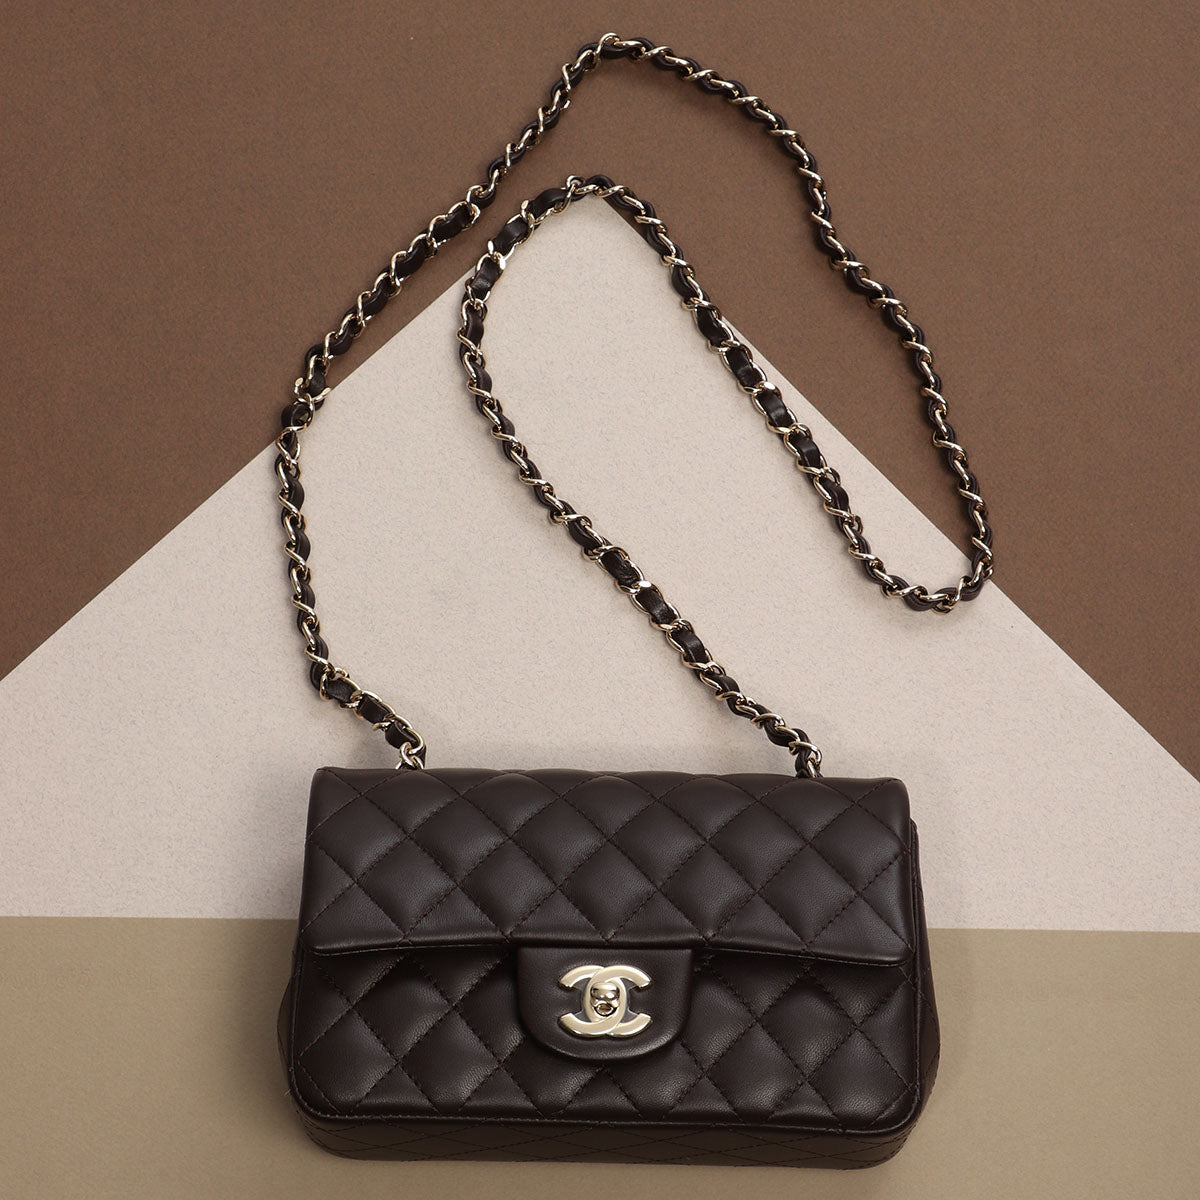 Get your hands on this classic and stylish Chanel Brown Lambskin